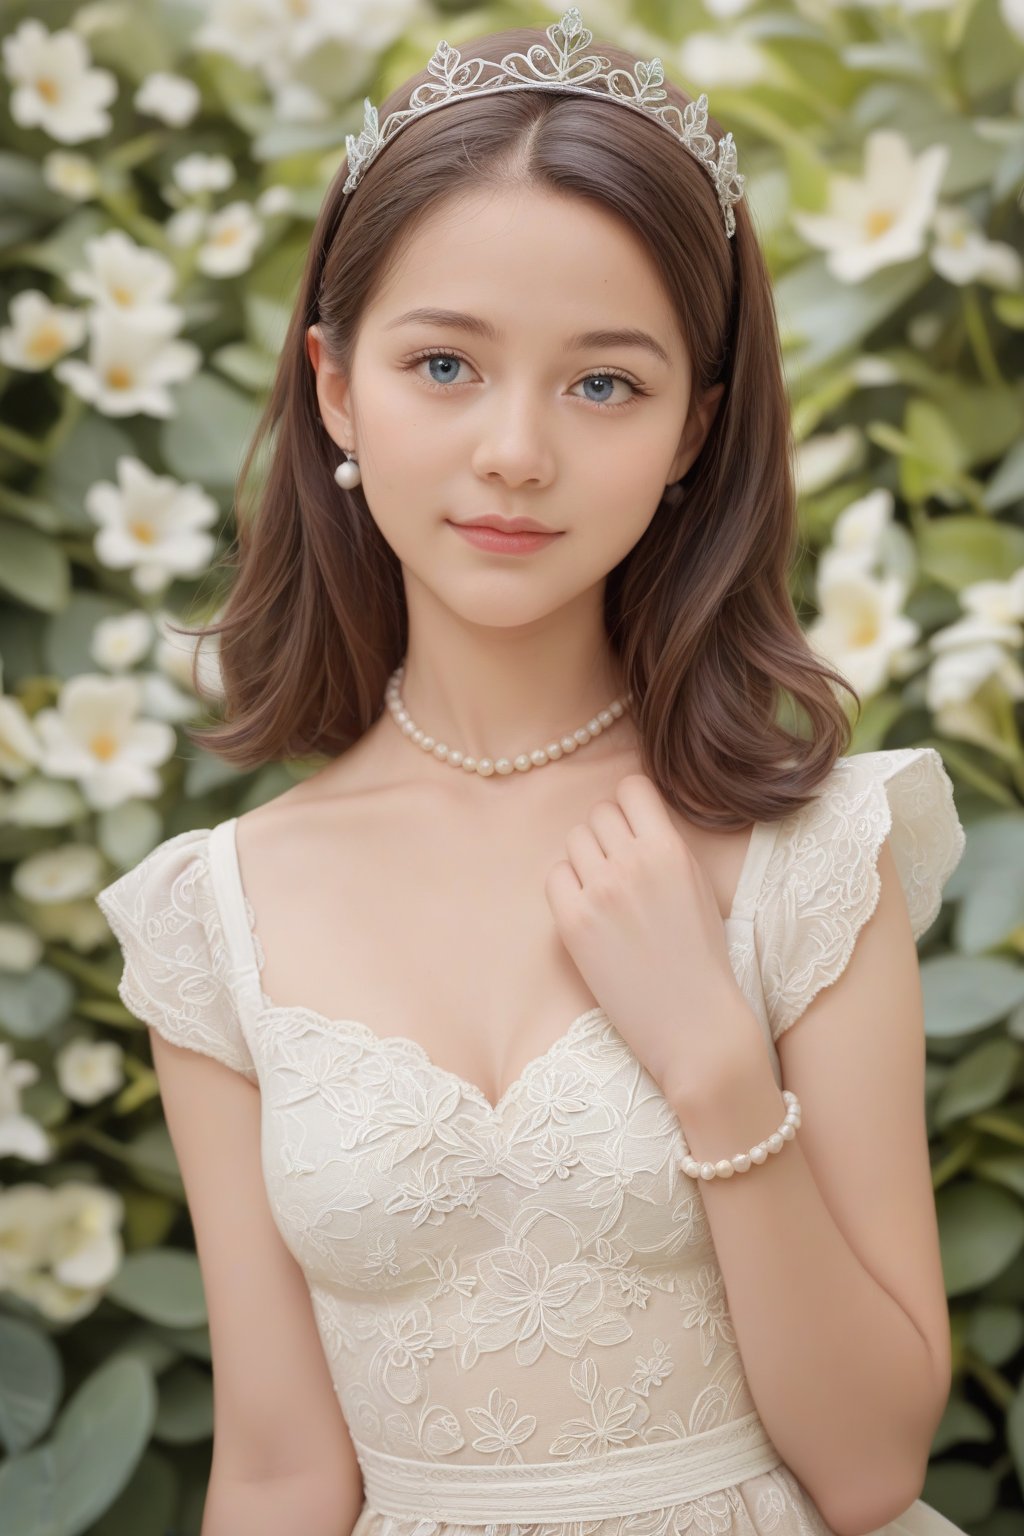 Score_9, Score_8_Up, Score_7_Up, Score_6_Up, Score_5_Up, Score_4_Up, Masterpiece, Best Quality, Realistic, Portraits, 1Girl, Solo, Upper Body, Garden Party, (Lace Dress, Ballet Flats), (Floral Tiara, Pearl Bracelet), (Blooming Garden Background)